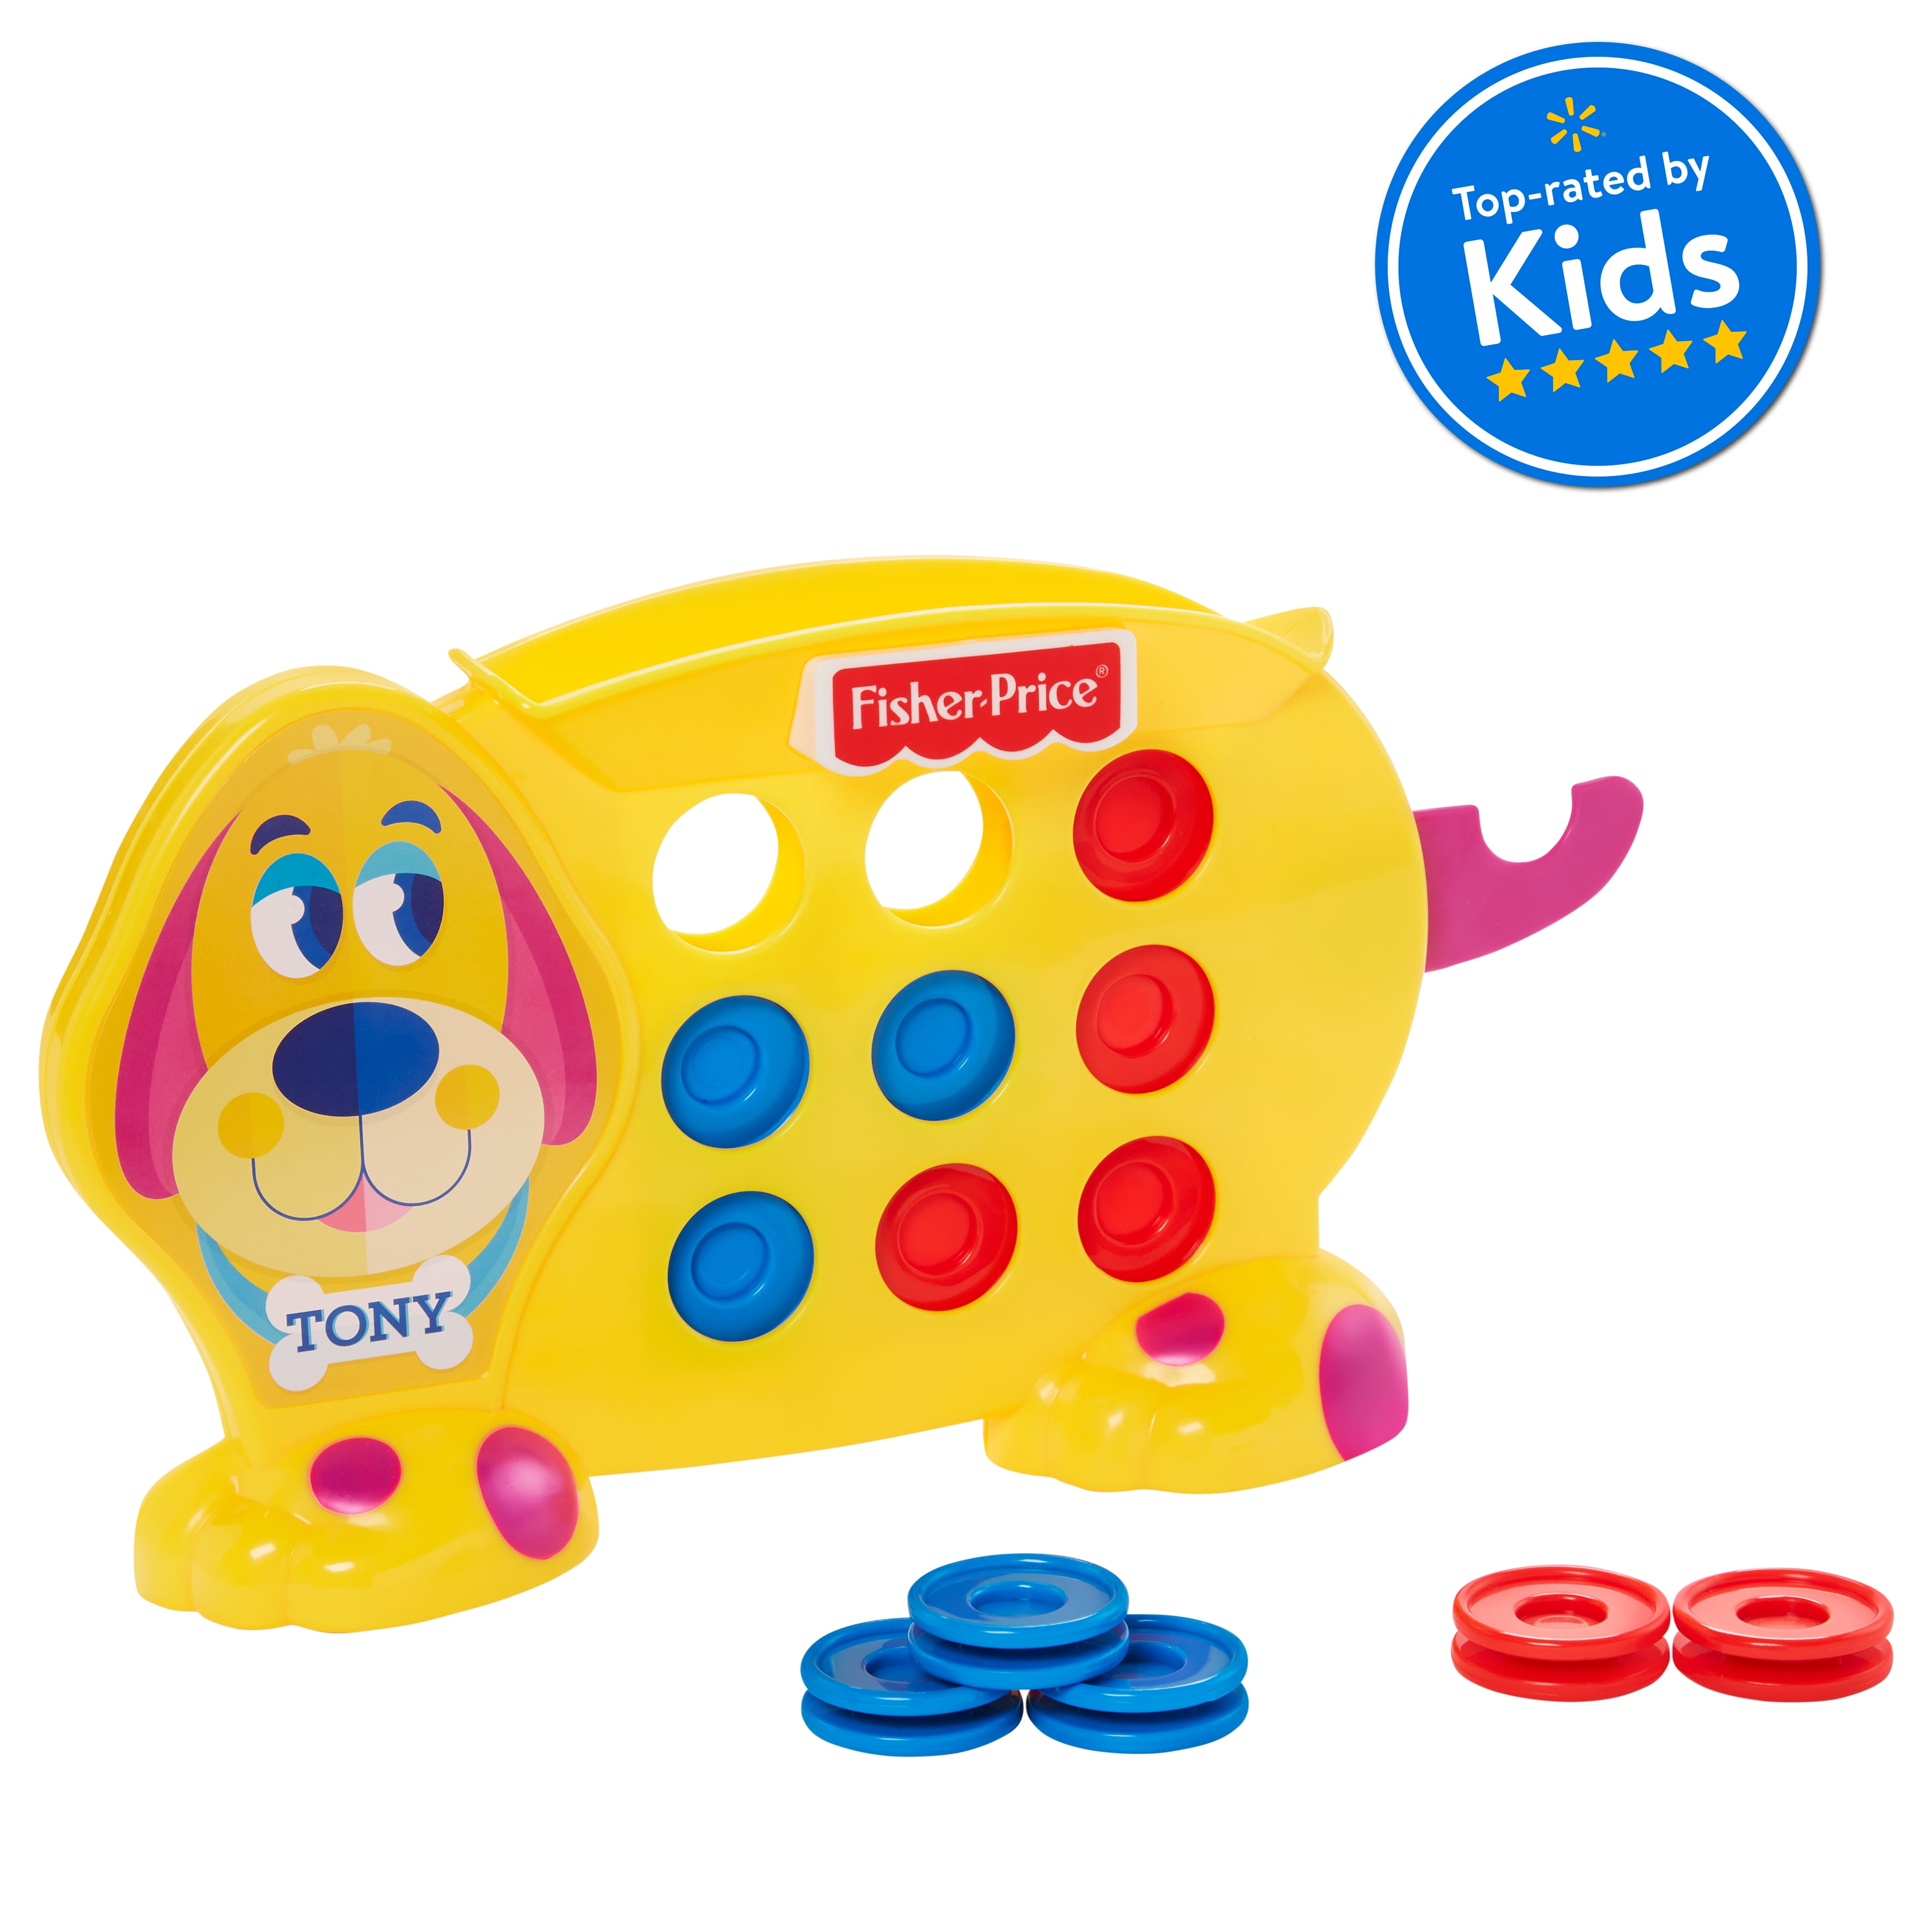 Fisher-Price Tic Tac Tony Kids Game for 3 Year Olds & Up - Walmart.com